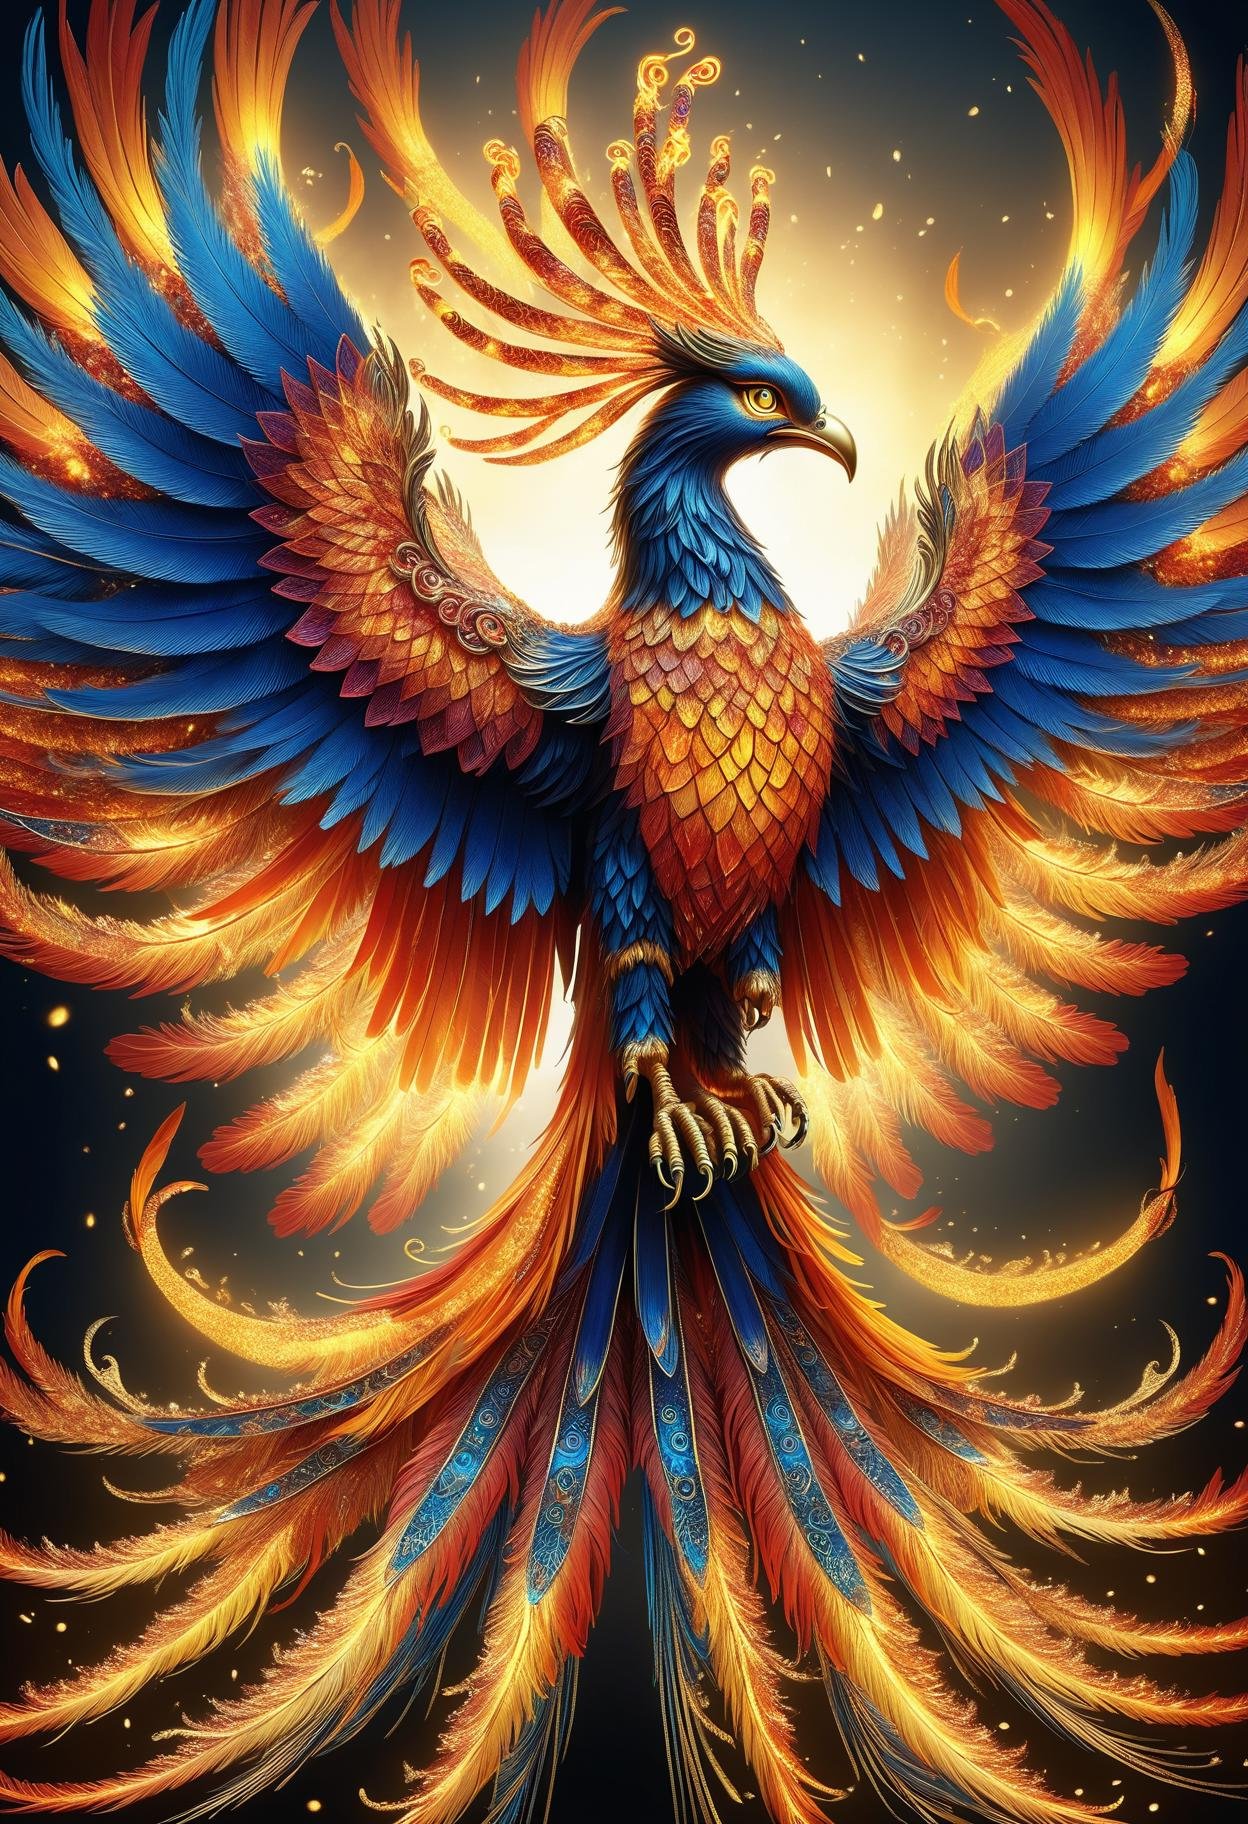 hyper detailed masterpiece,realistic,DonM1un4rN3wY34rXL  phoenix, mythical powerful bird, in flames, vibrant colors,, large and majestic wings long flowing tail feathers, resplendent radiant plumage immortality, renewal, rebirth, sun and fire  in  military history ,ornamented  <lora:myLora\DonM1un4rN3wY34rXL-000006:.8>,